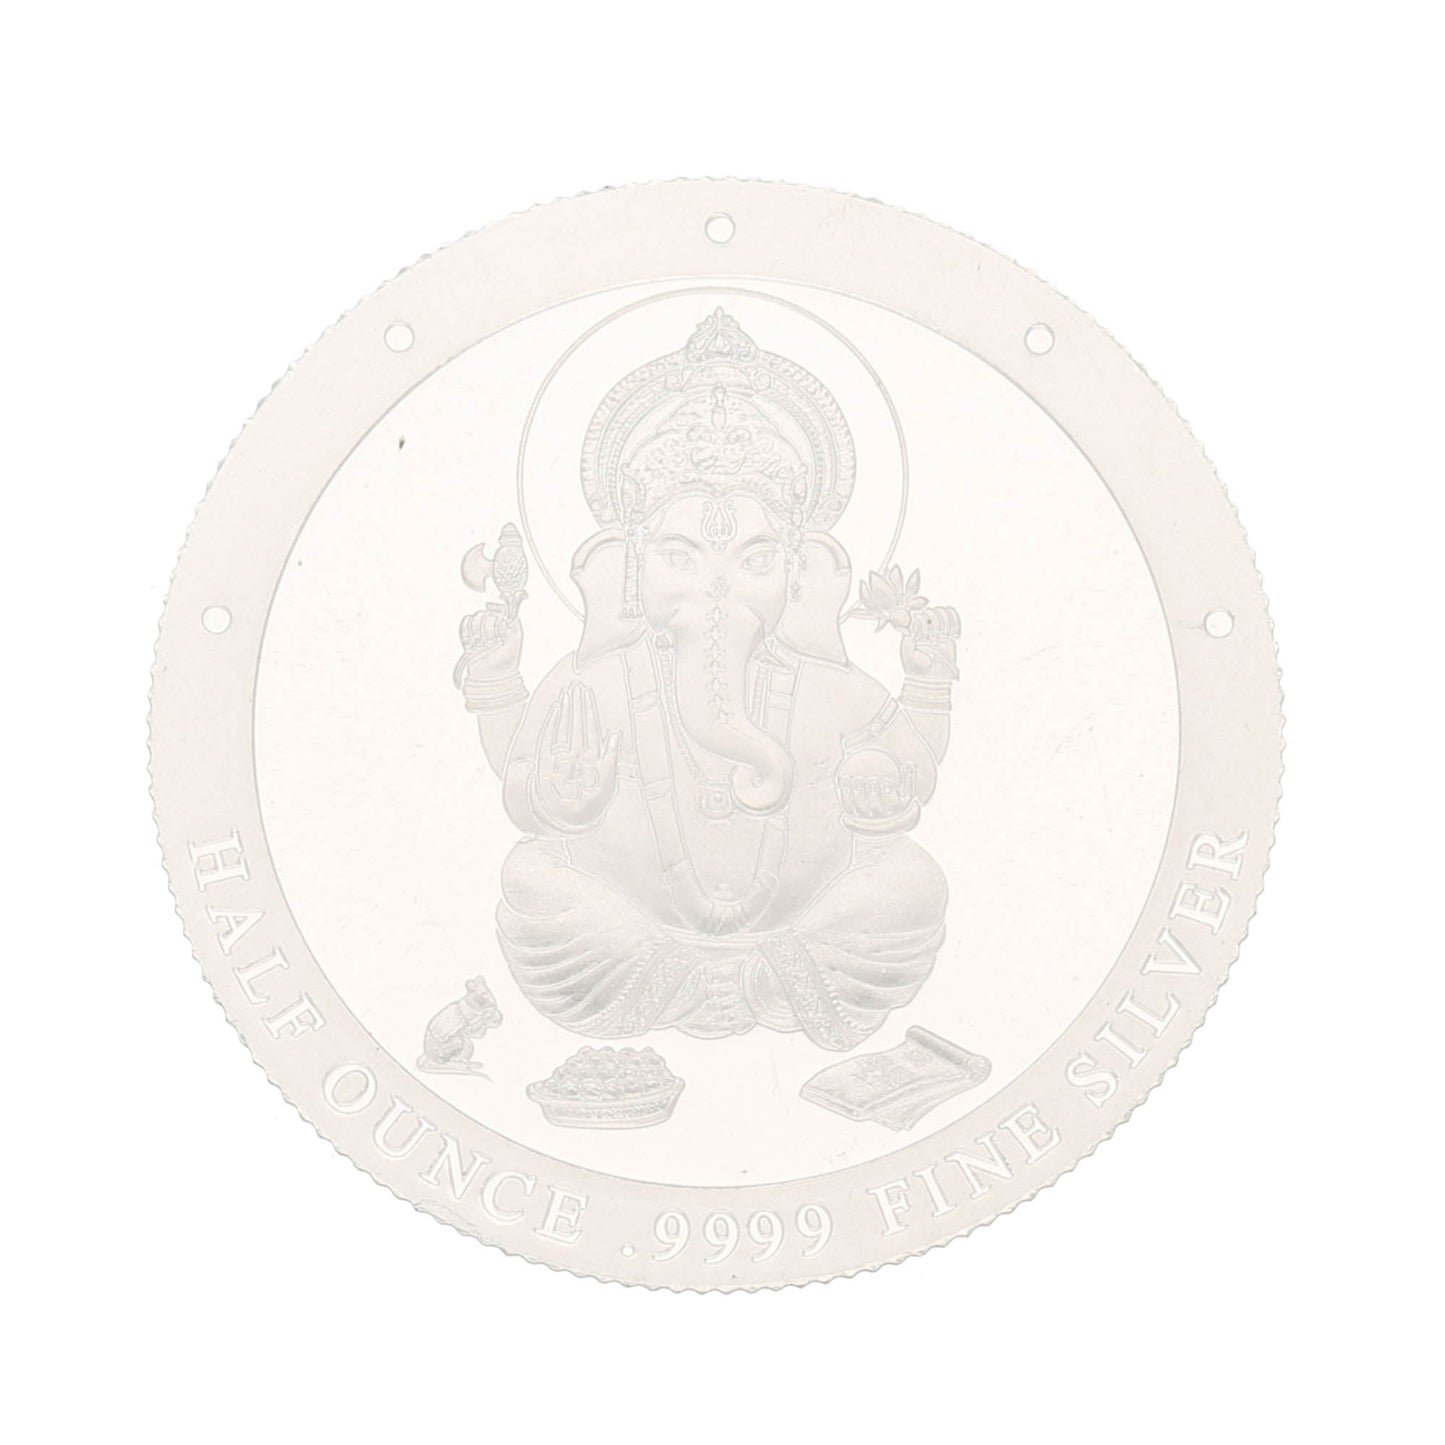 New Sterling Silver 1/2 Oz Ganesh Coin